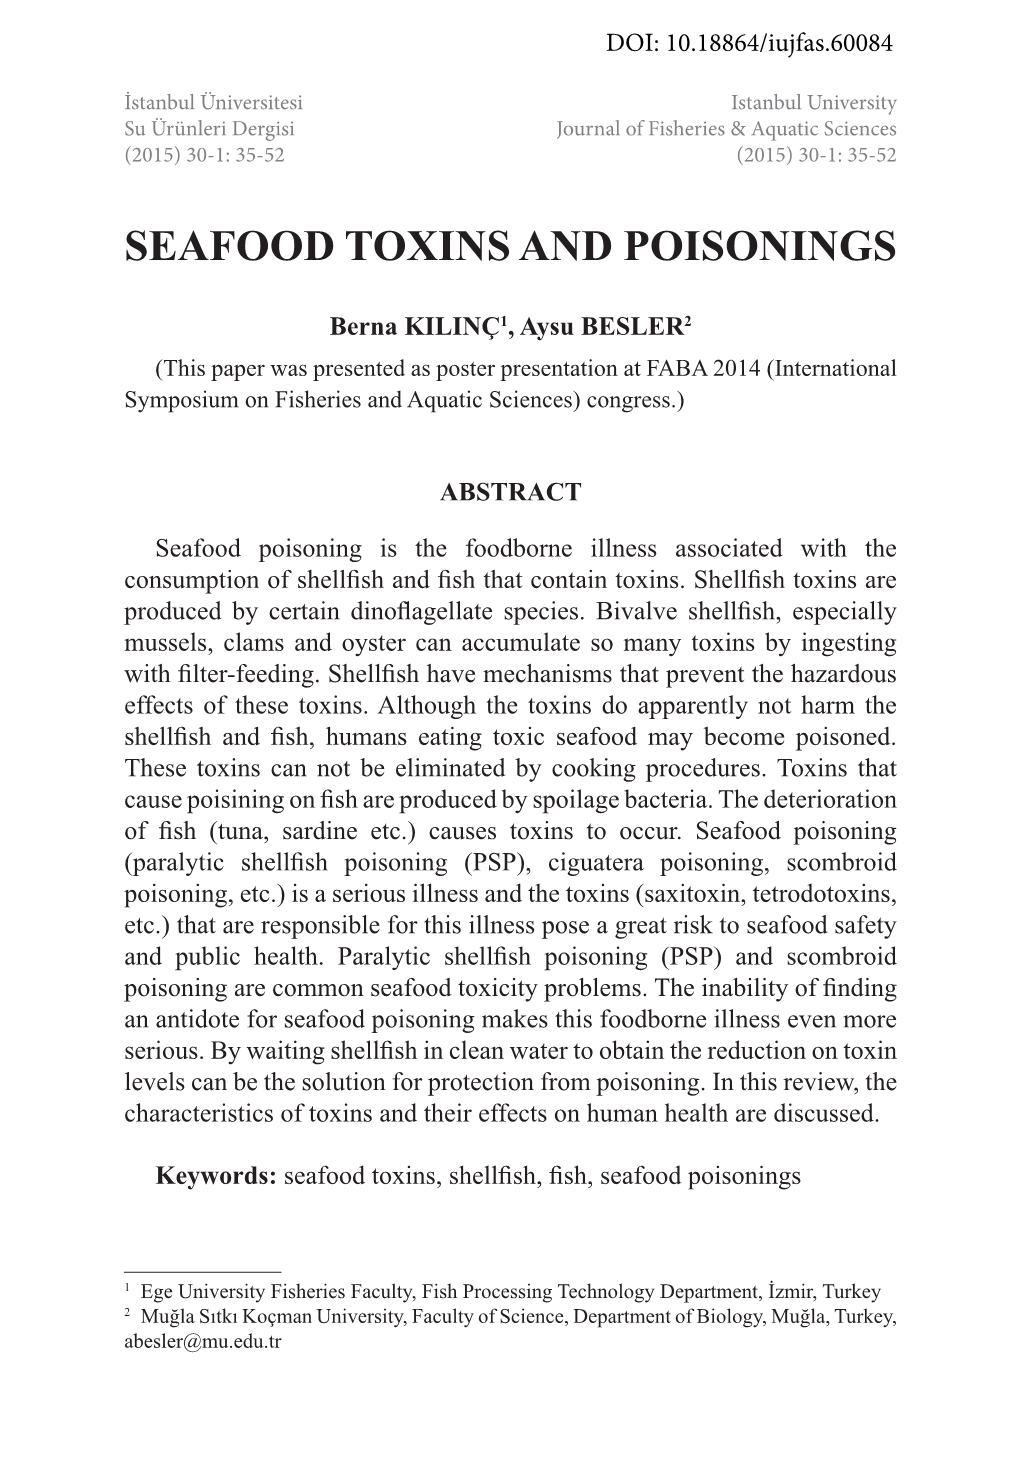 Seafood Toxins and Poisonings